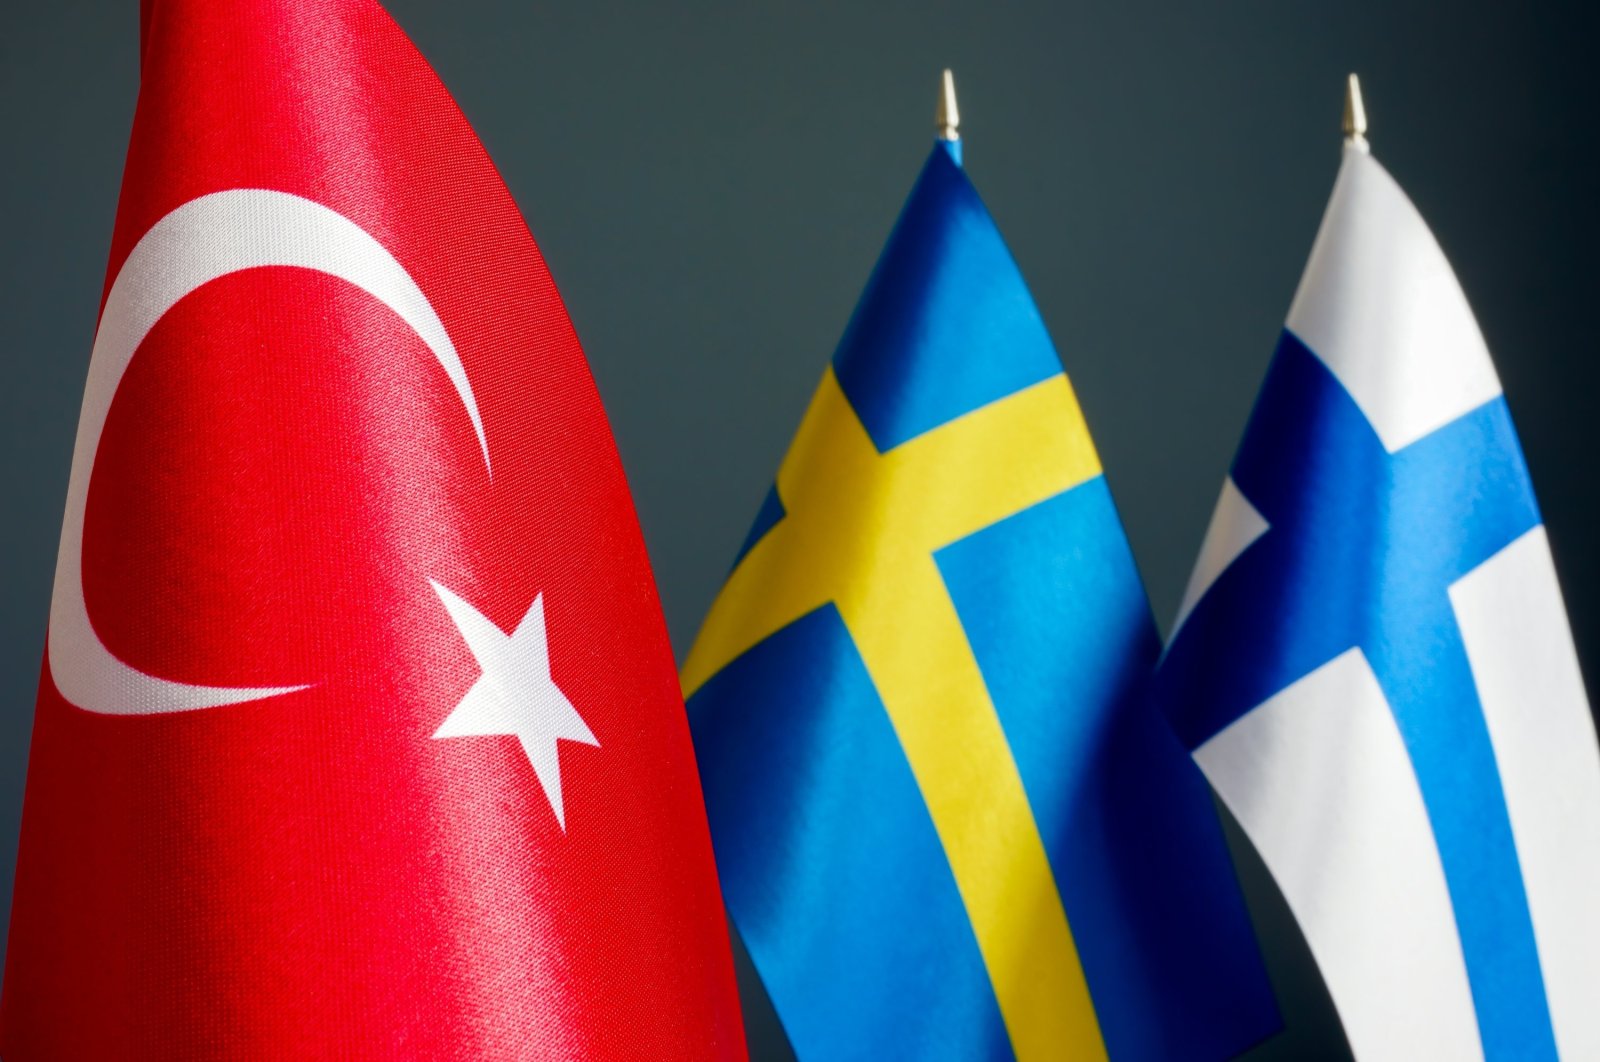 From left to right, the flags of Türkiye, Sweden and Finland are seen. (Shutterstock File Photo)